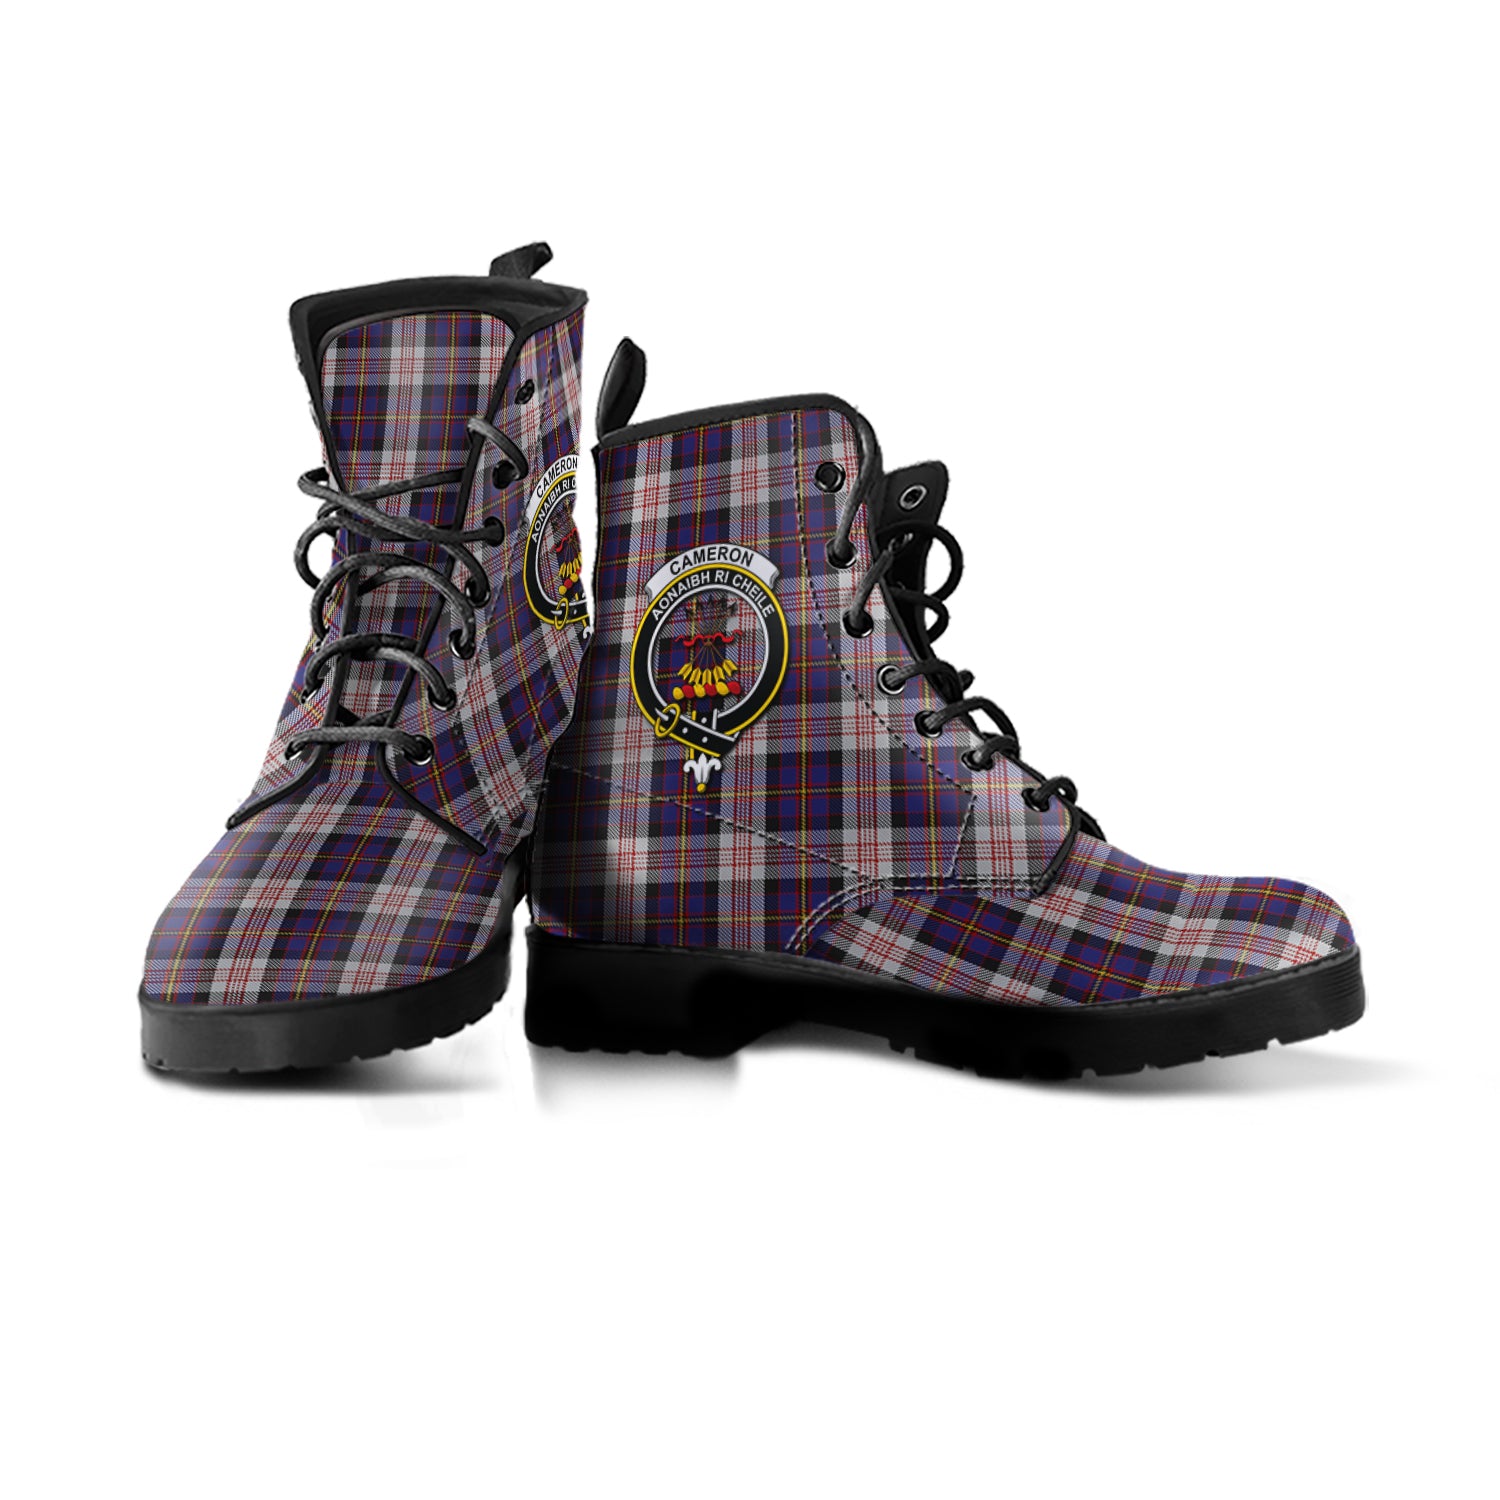 cameron-of-erracht-dress-tartan-leather-boots-with-family-crest